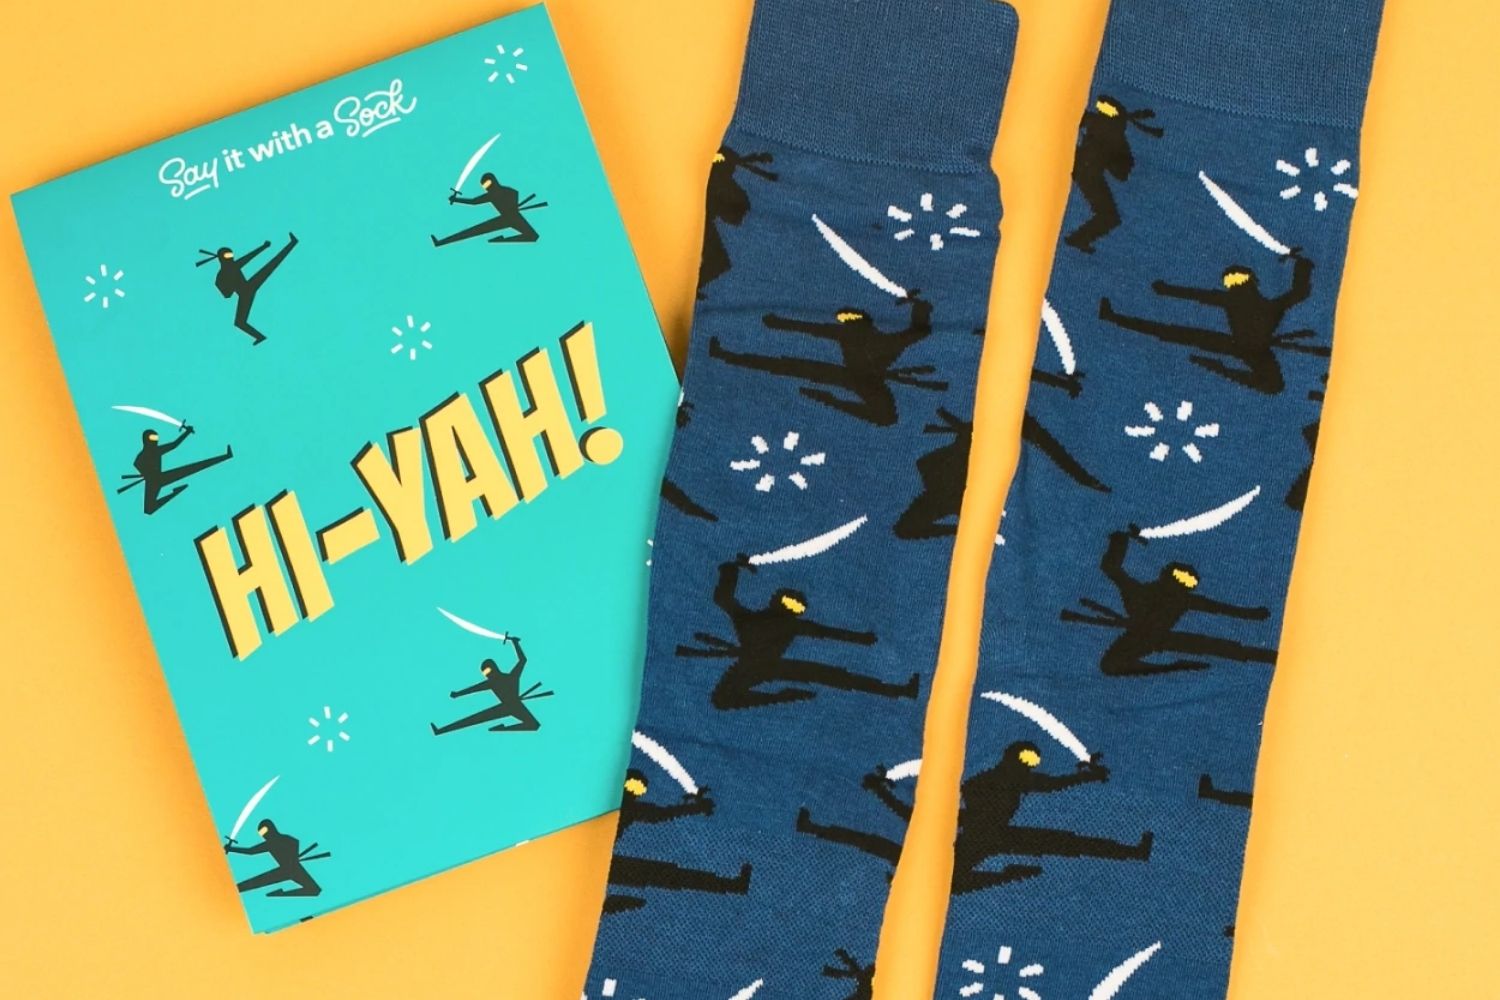 The Best Subscription Gifts Options: Say it with a Sock Subscription Box